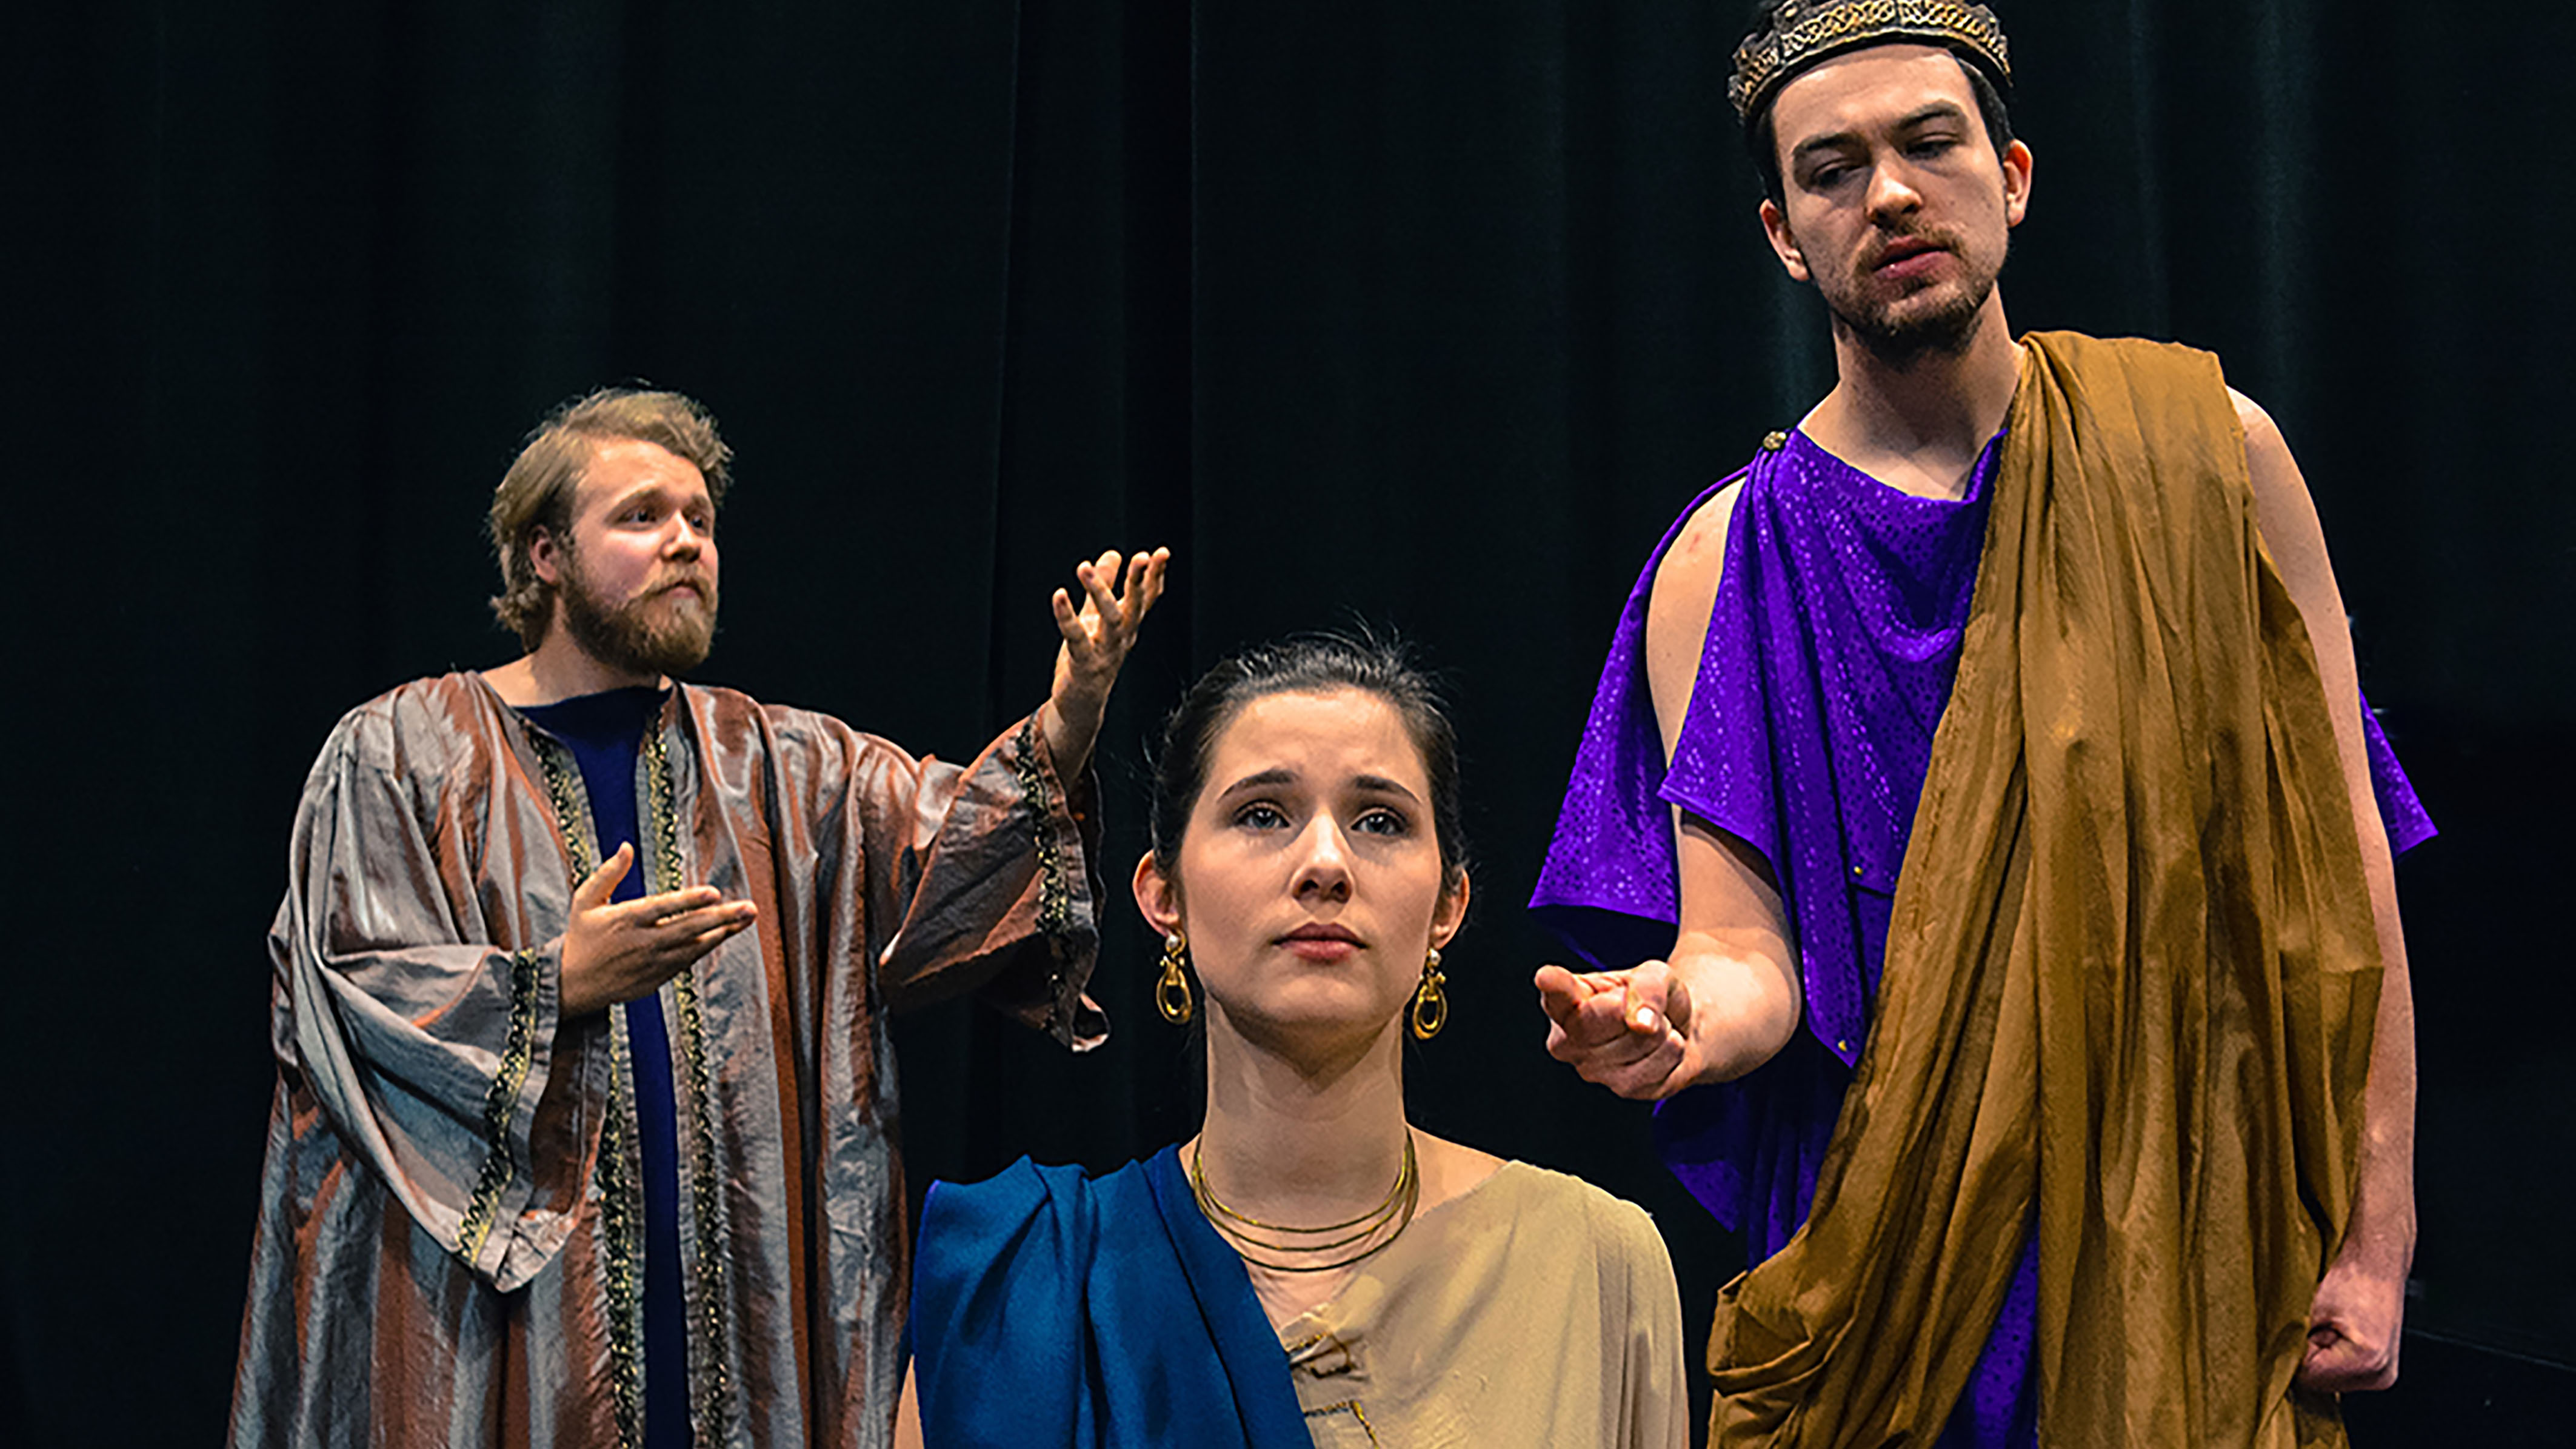 Keene State College students (from left) Than Spence, Heather Hunt and Kenon Veno perform Antigone to lead off a trilogy of Greek tragedies presented collaboratively by three schools in the University System of New Hampshire.